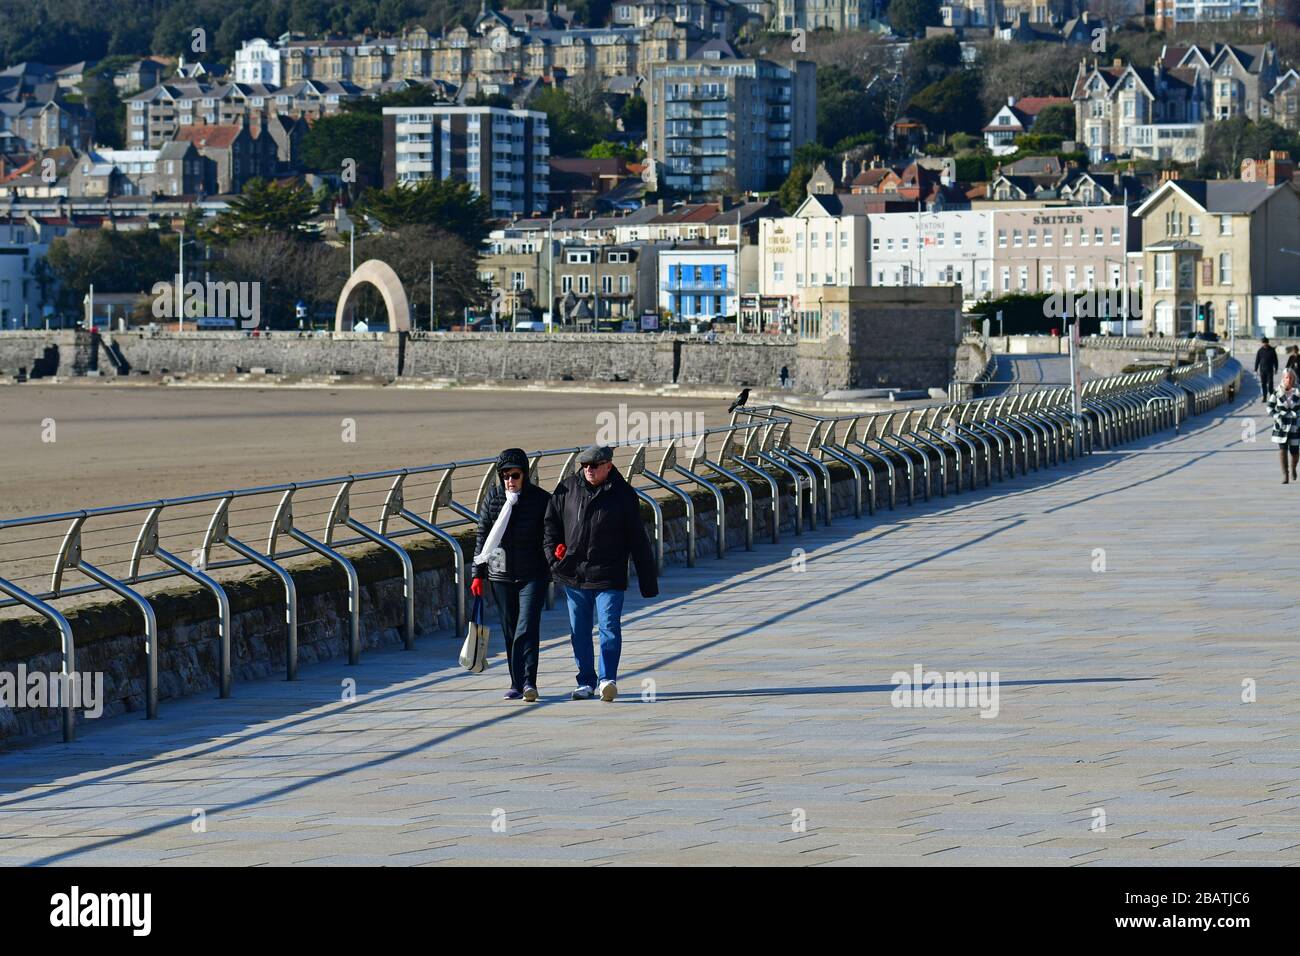 Weston-Super-Mare, North Somerset, UK. 29th Mar, 2020. UK covid-19 virus lockdown.Walkers  on the promenade.World Famous Weston Super Mare seafront with new Government Guide Lines Iminent. Picture credit Robert Timoney/Alamy/Live/News Stock Photo